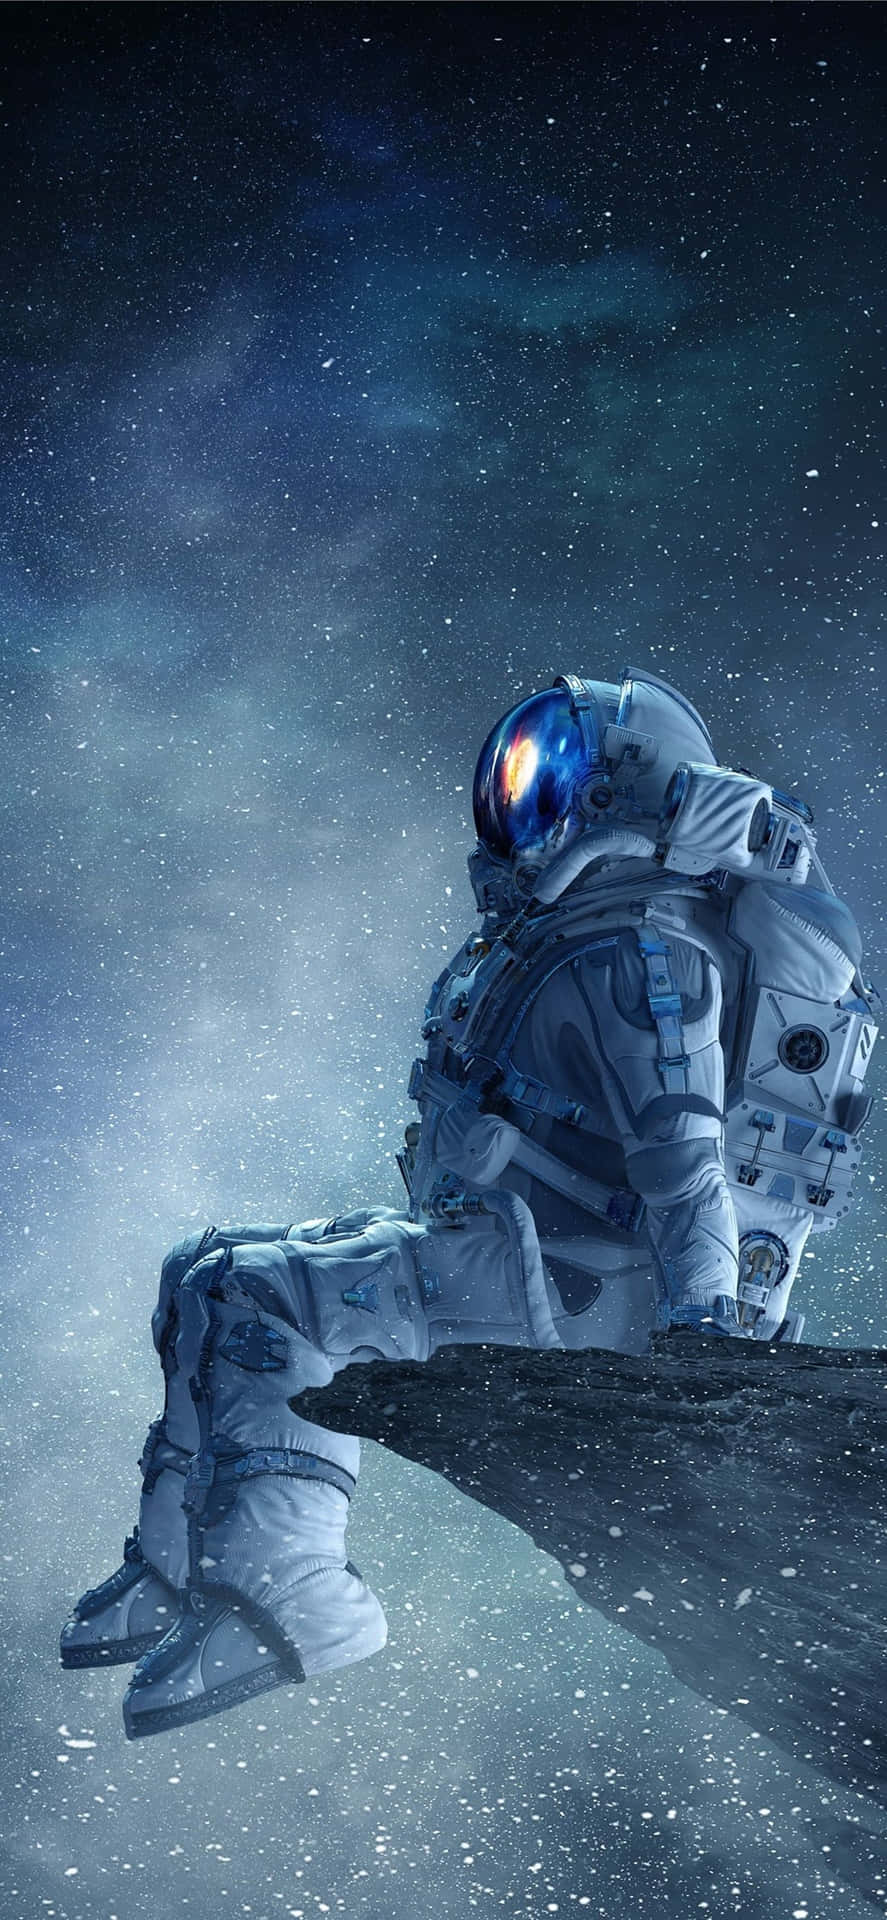 A jaw-dropping view of an astronaut in outer space Wallpaper